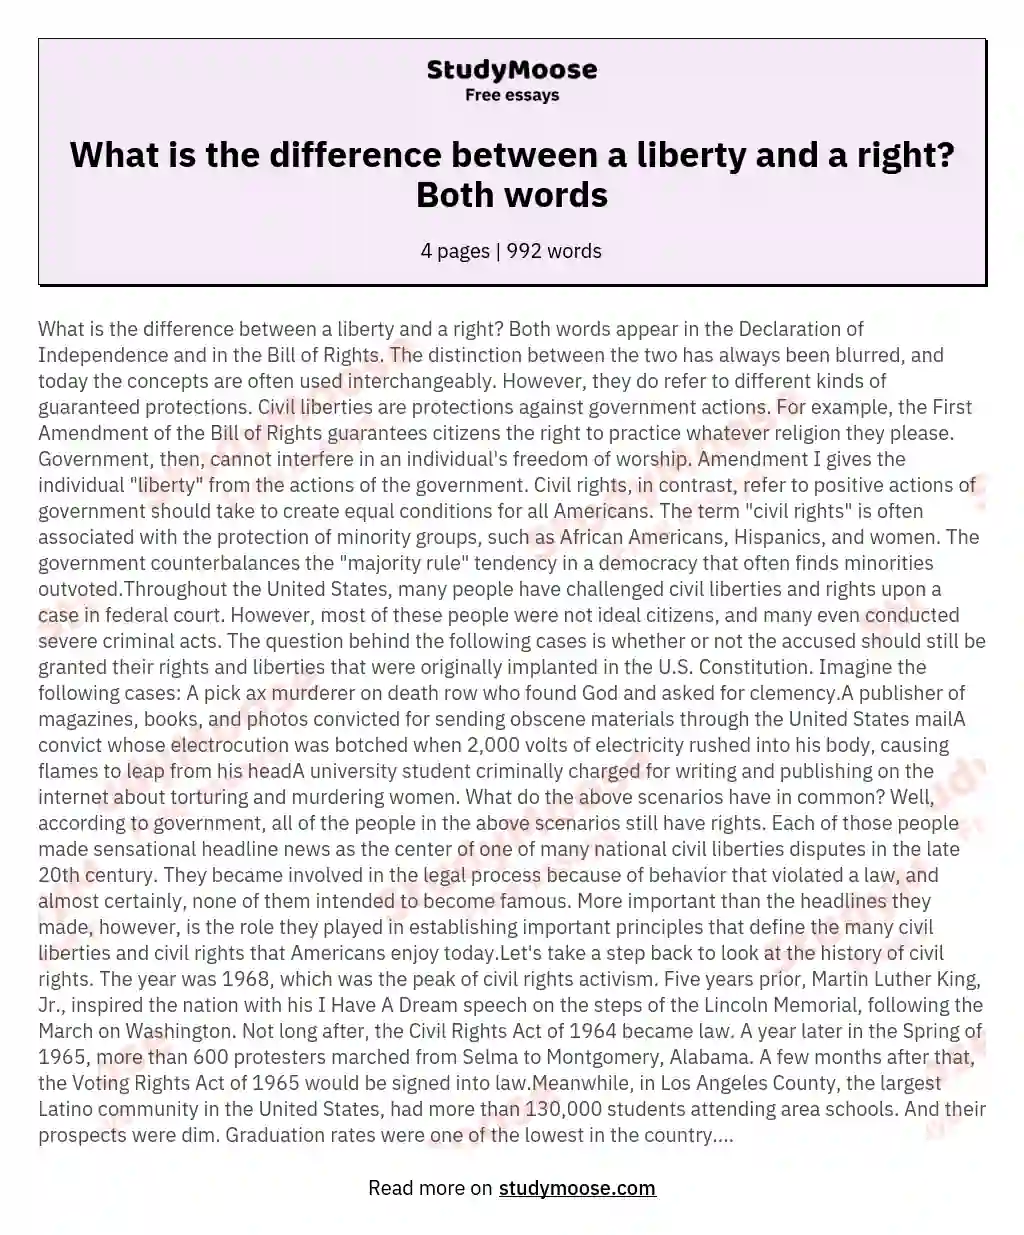 What is the difference between a liberty and a right? Both words